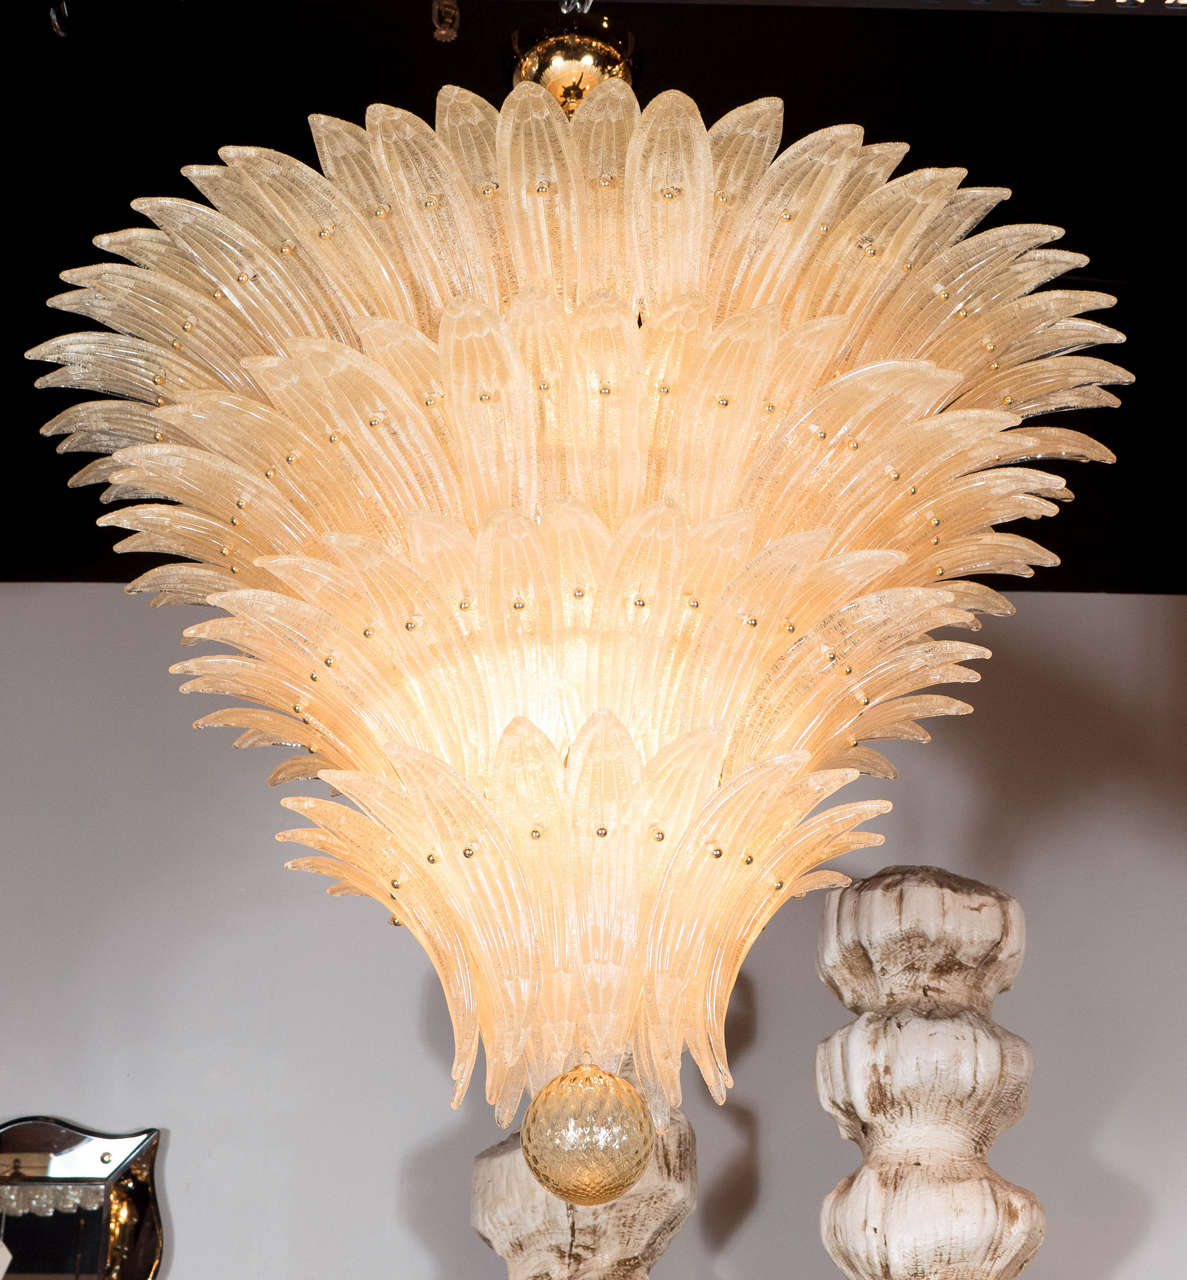 This exquisite Palma chandelier consists of five tiers of individually hand blown Murano glass stylized palm fronds in an iridescent Champagne color that are adhered to its brass frame in an alternating fashion on each tier that form a descending